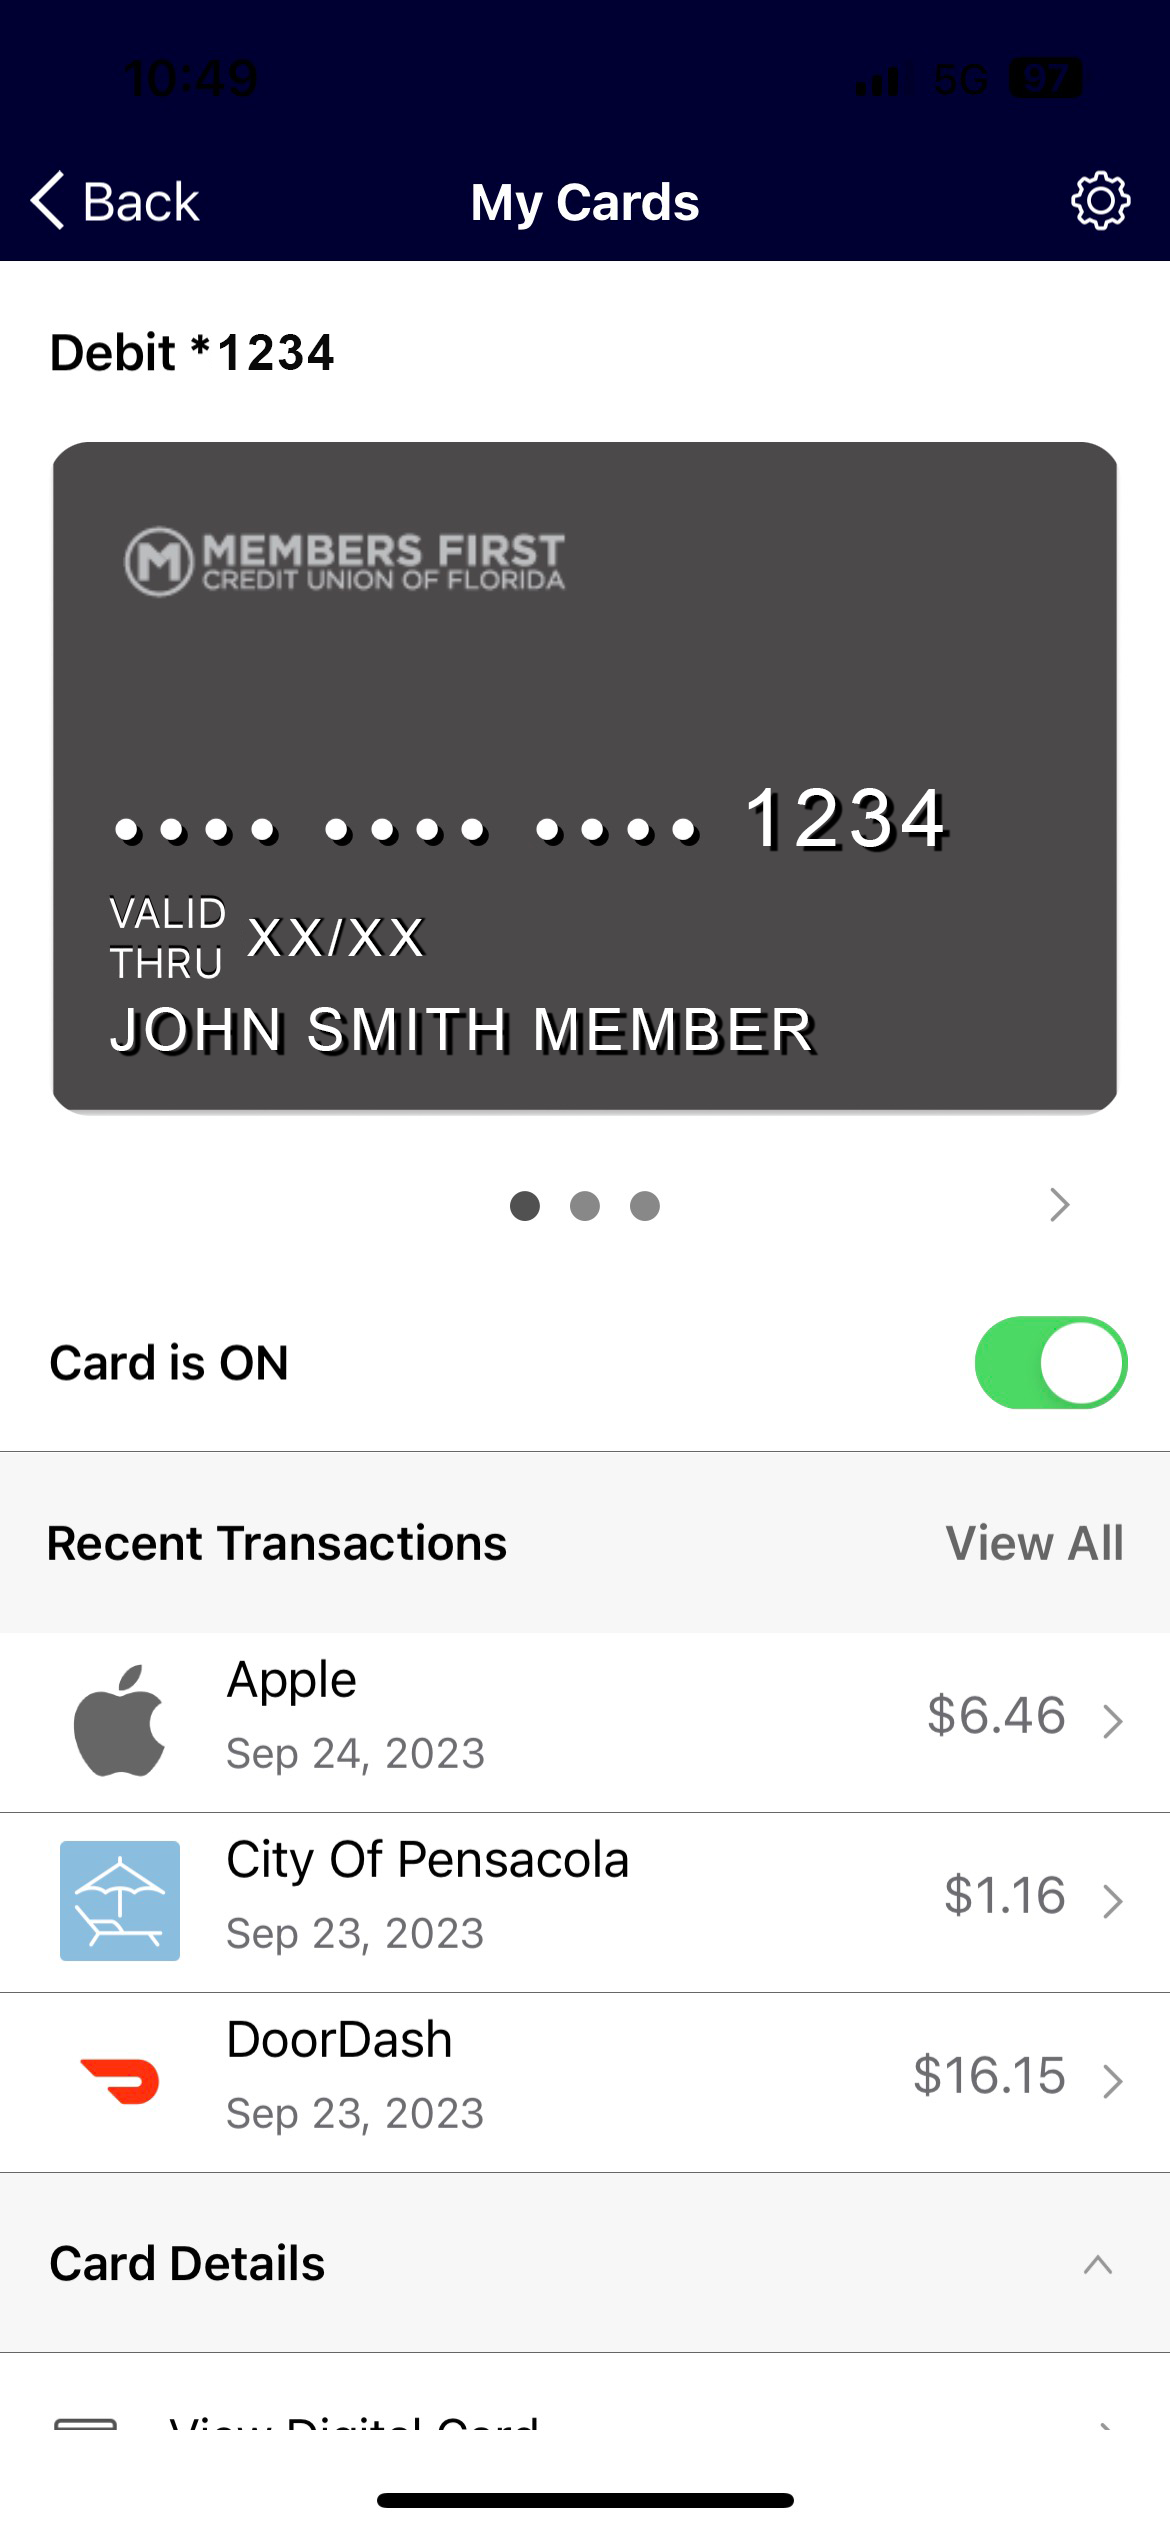 my cards on mobile banking